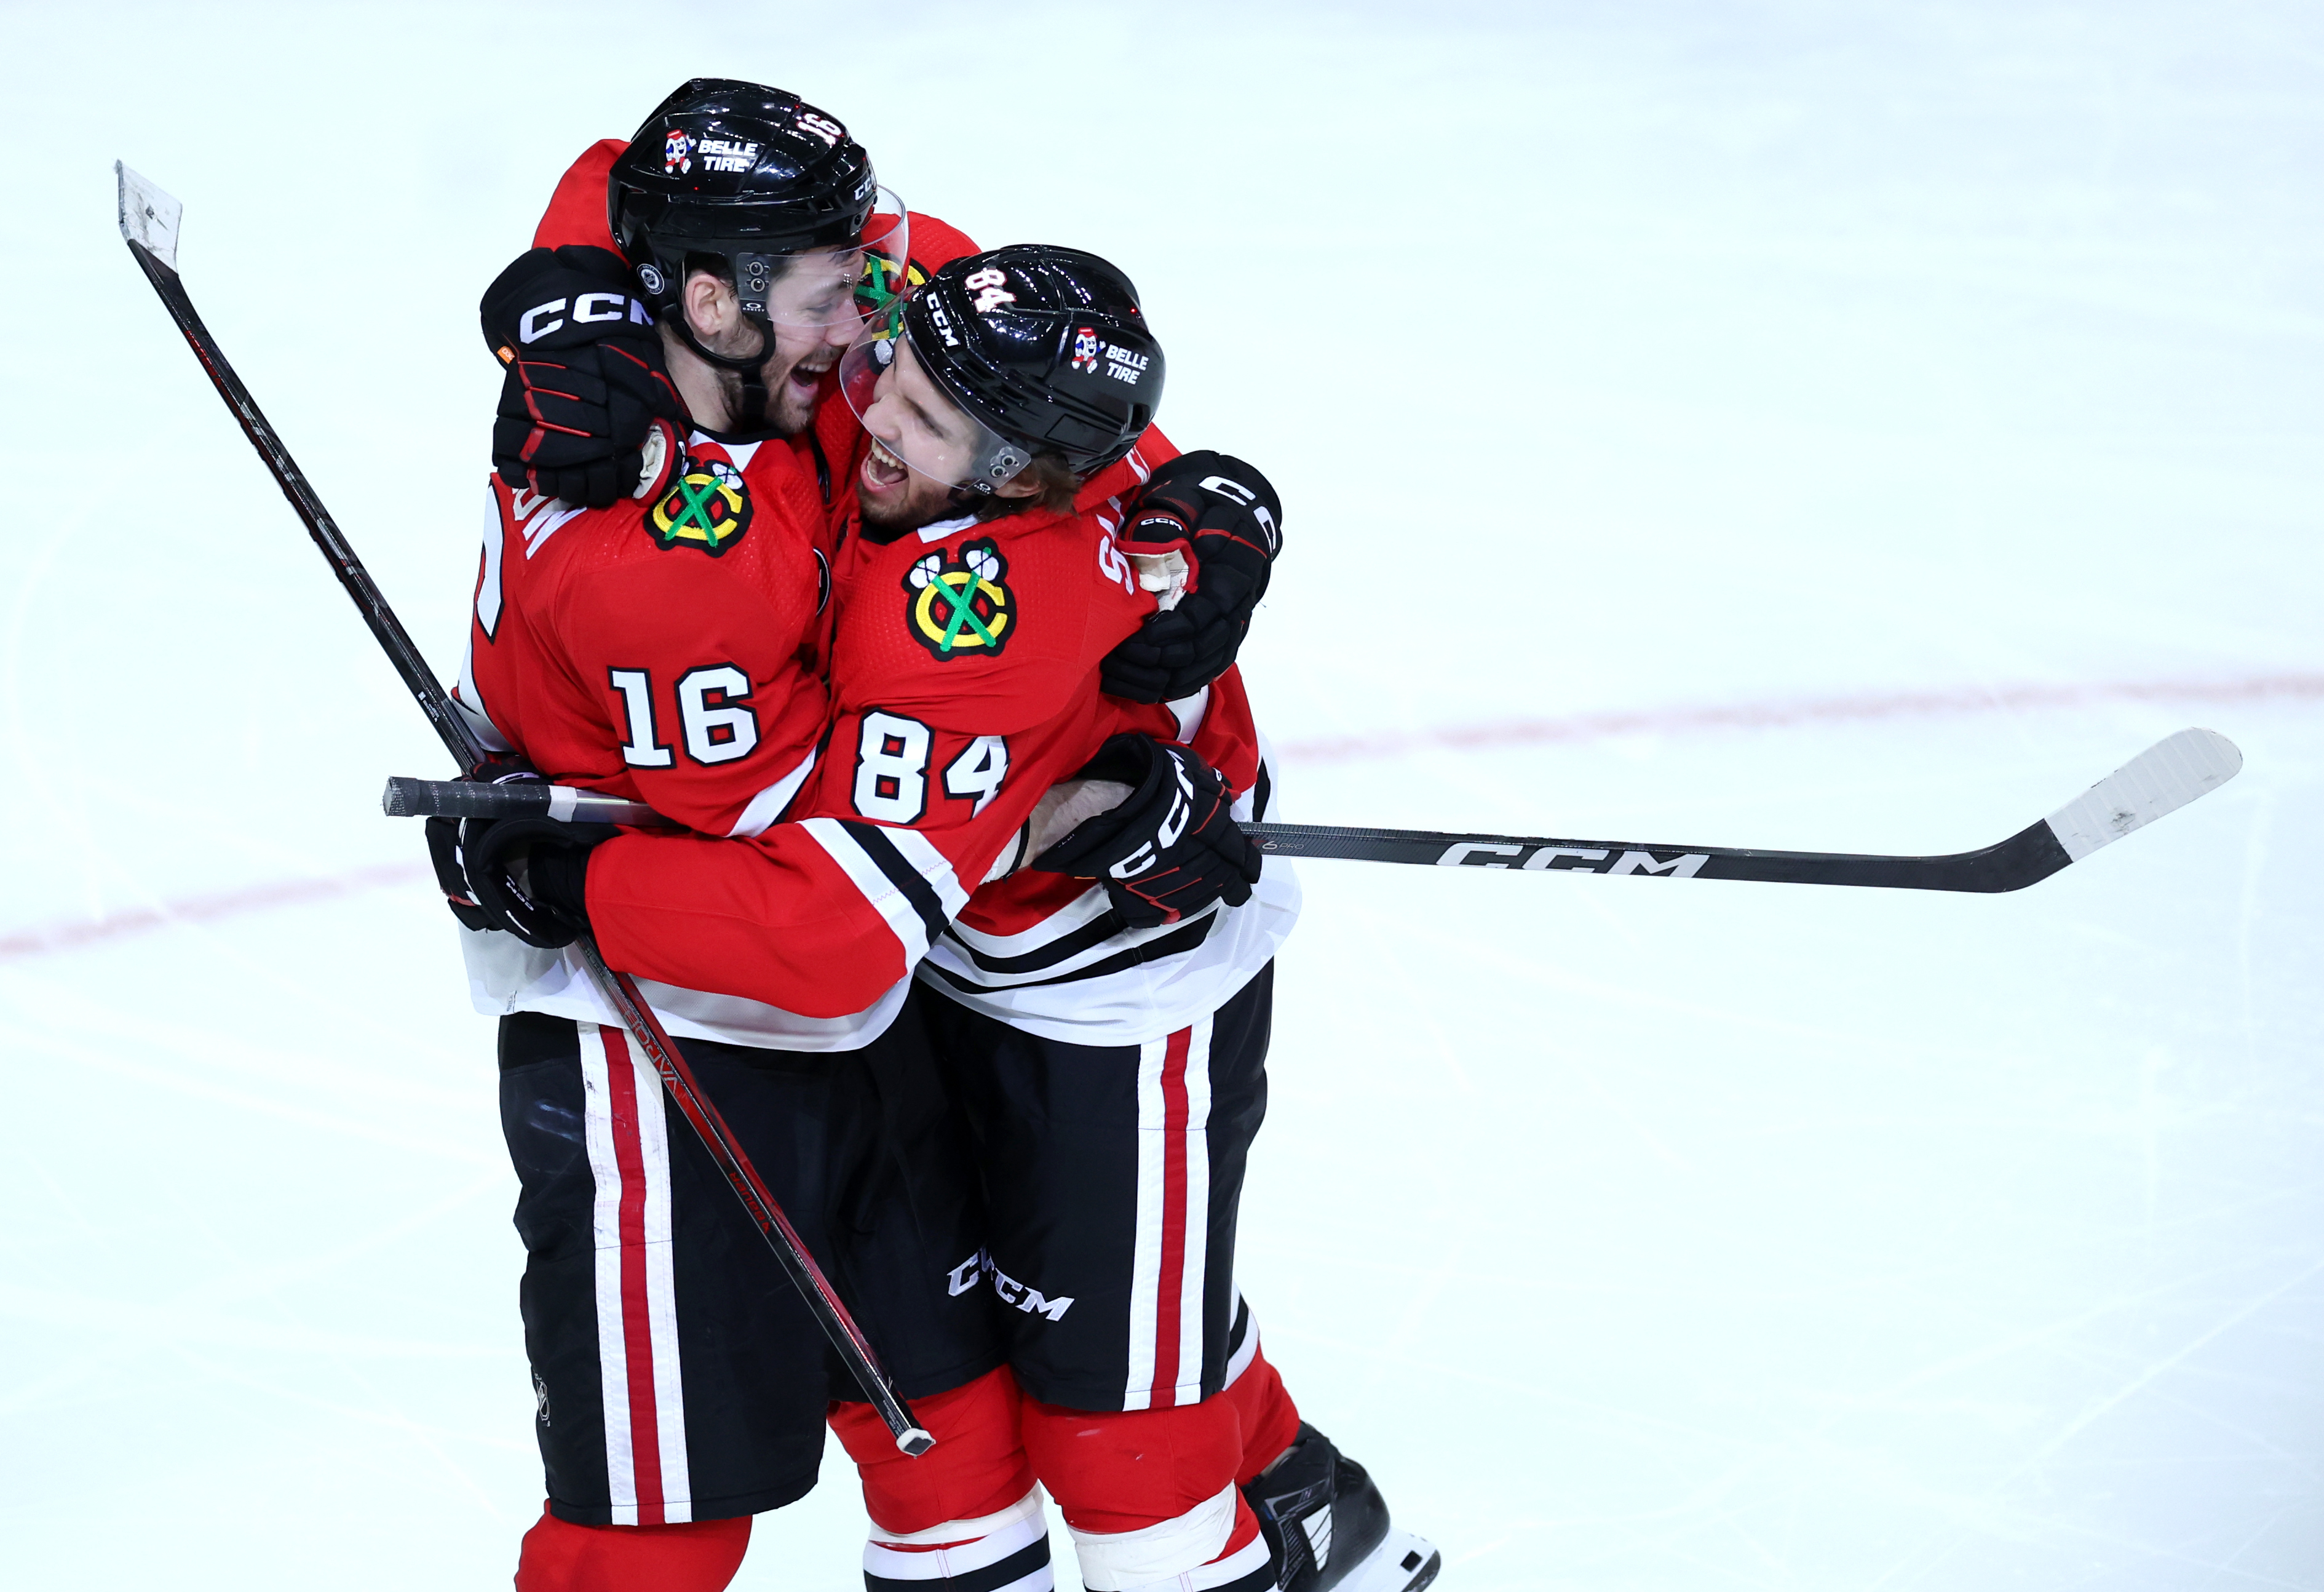 Chicago Blackhawks center Jason Dickinson (16) and left wing Landon Slaggert (84) celebrate after Slaggert thought he scored in the third period of a game against the Calgary Flames at the United Center in Chicago on March 26, 2024. After a review, the goal was disallowed. (Chris Sweda/Chicago Tribune)